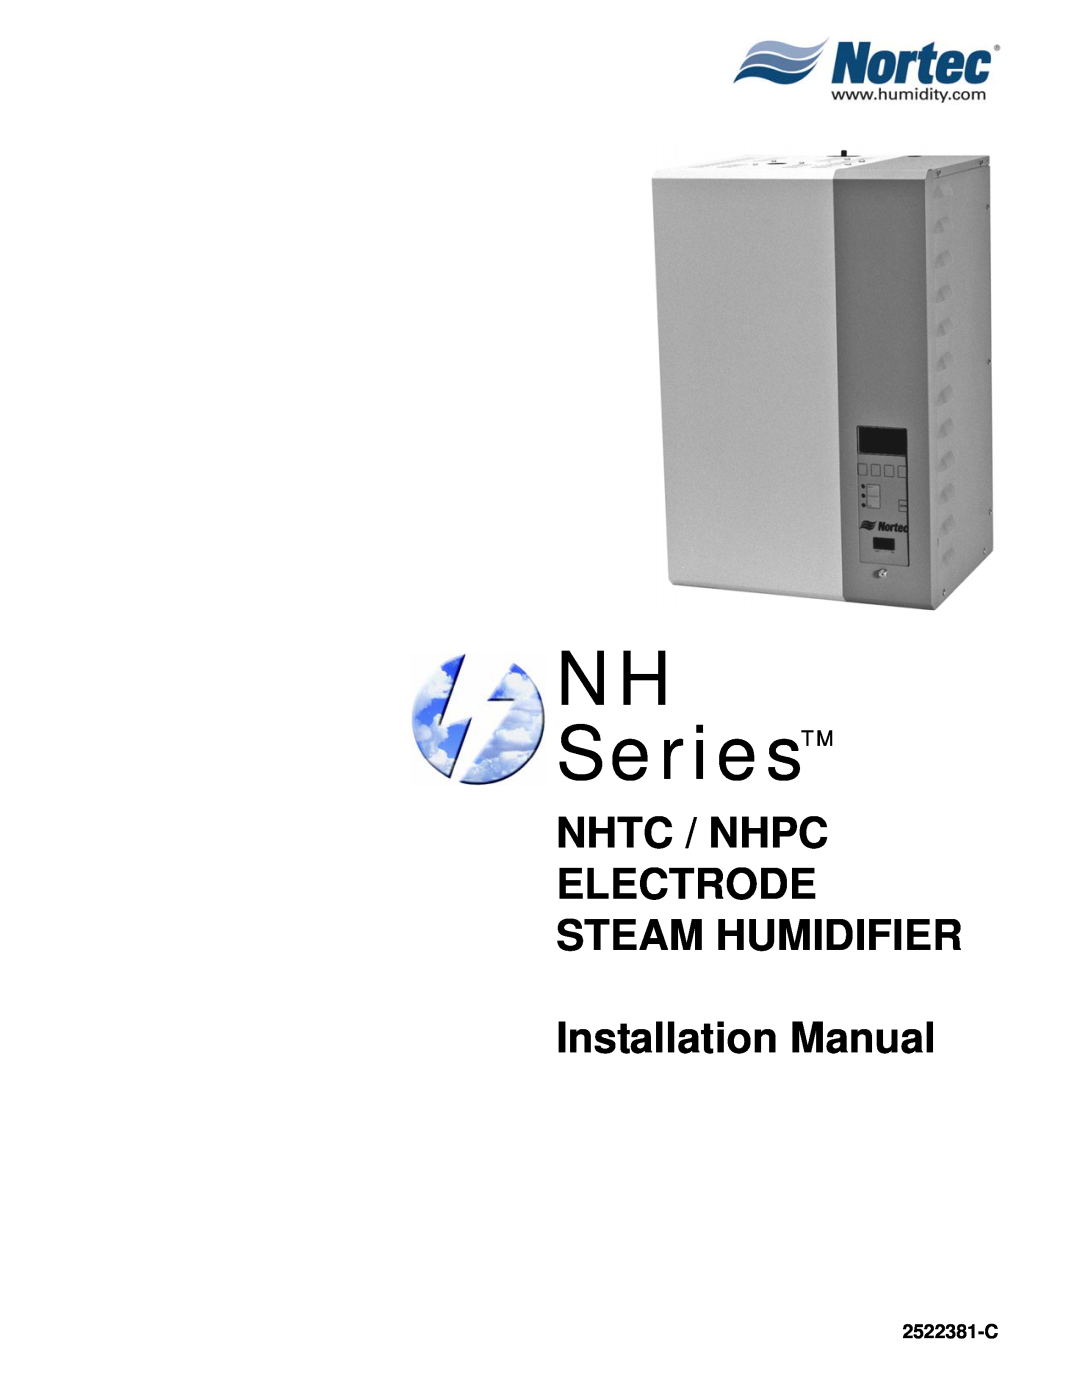 Nortec installation manual 2522381-C, NH SeriesTM, Nhtc / Nhpc Electrode Steam Humidifier, Installation Manual 